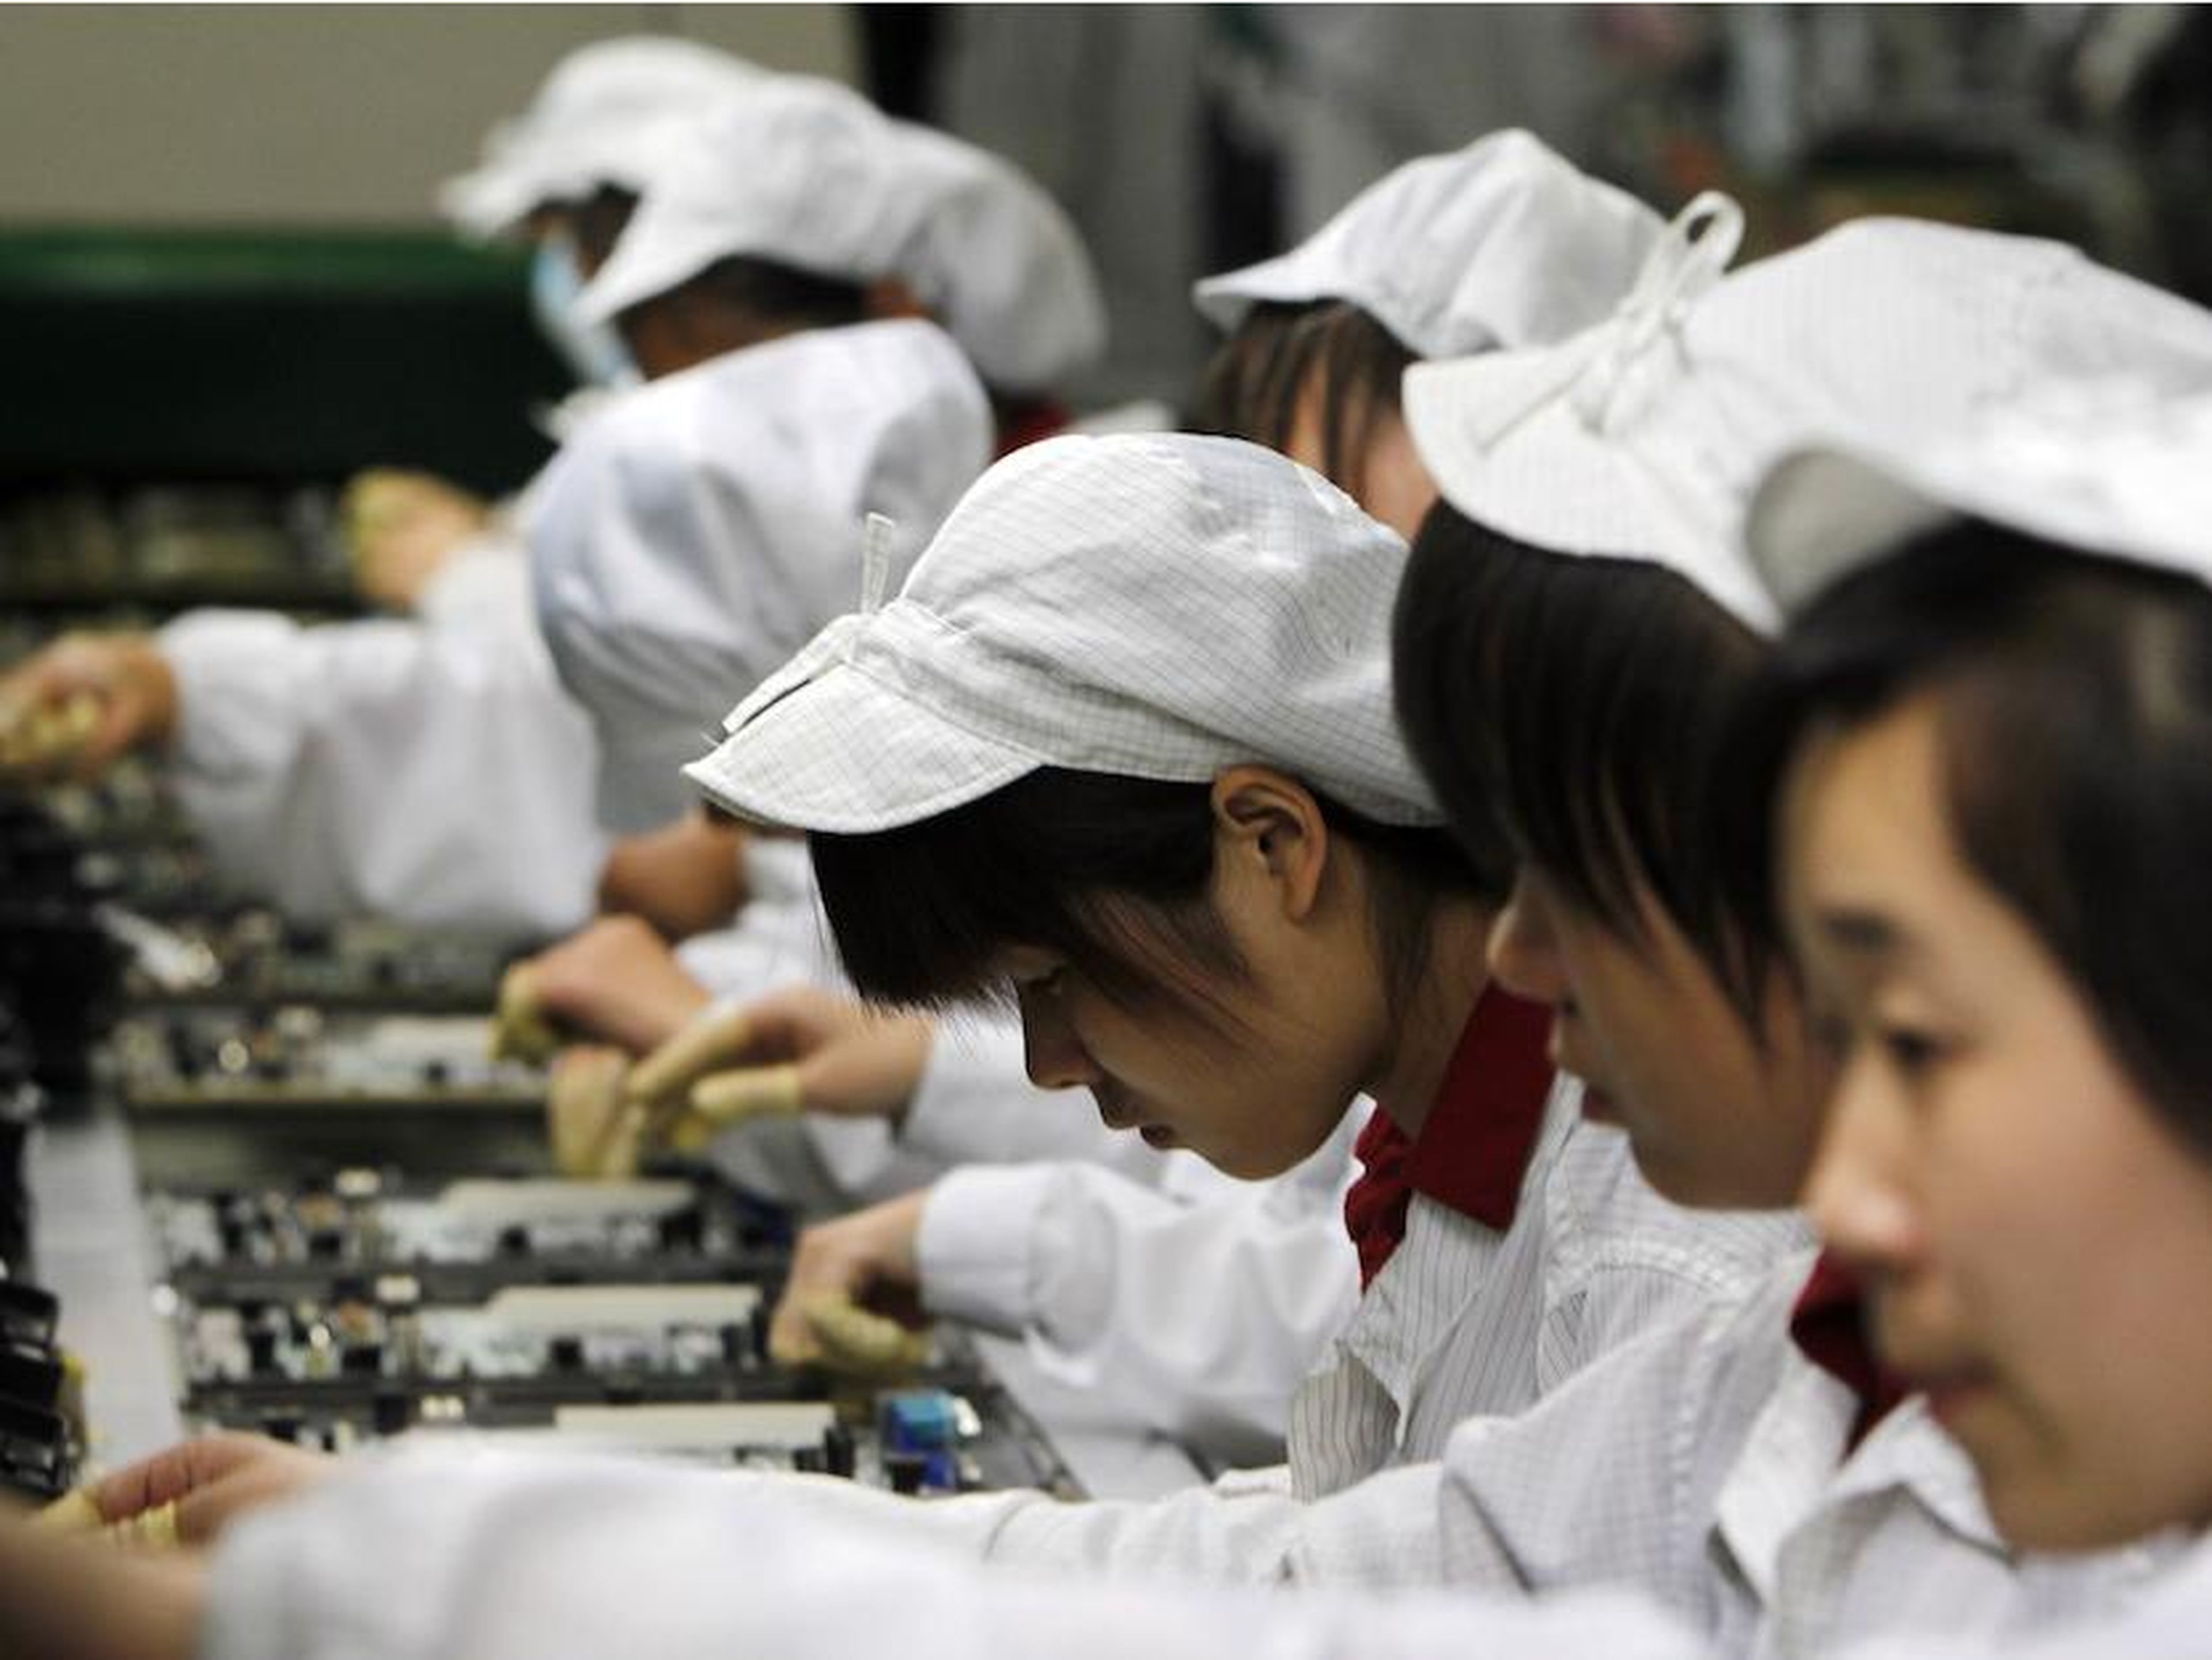 Workers in a Foxconn factory in China.